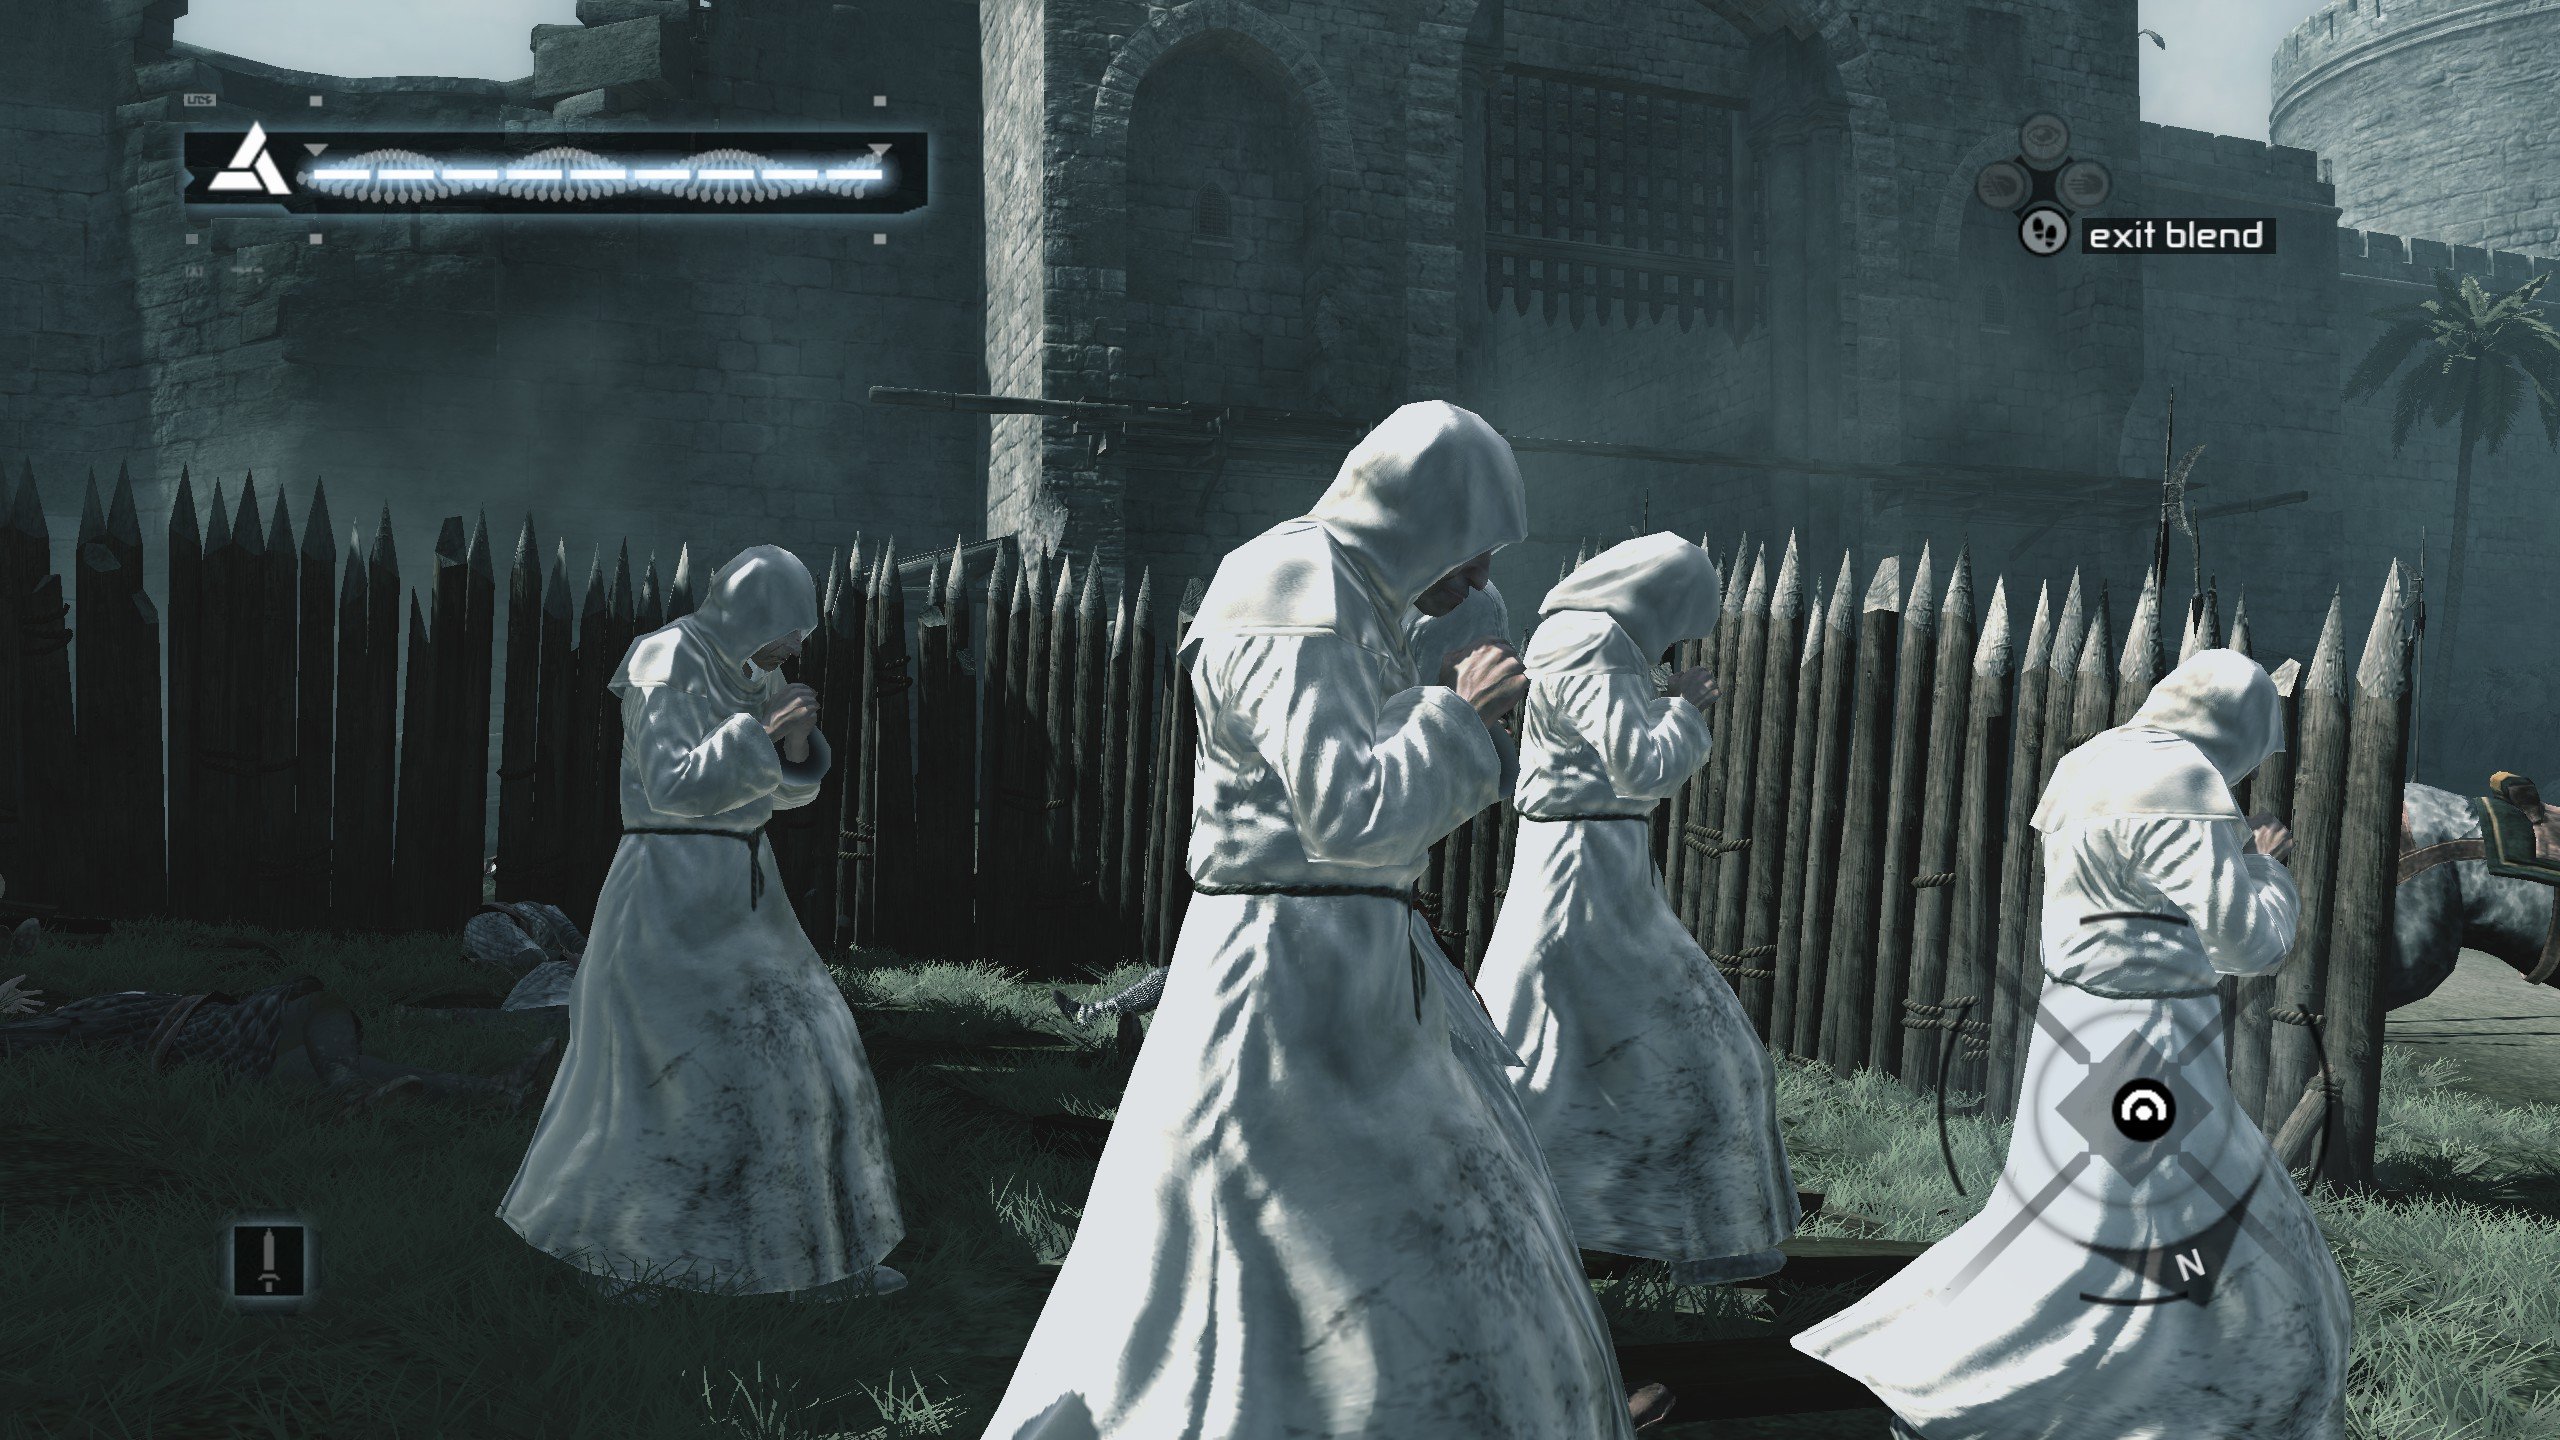 The player blends among priests in the original Assassin's Creed.